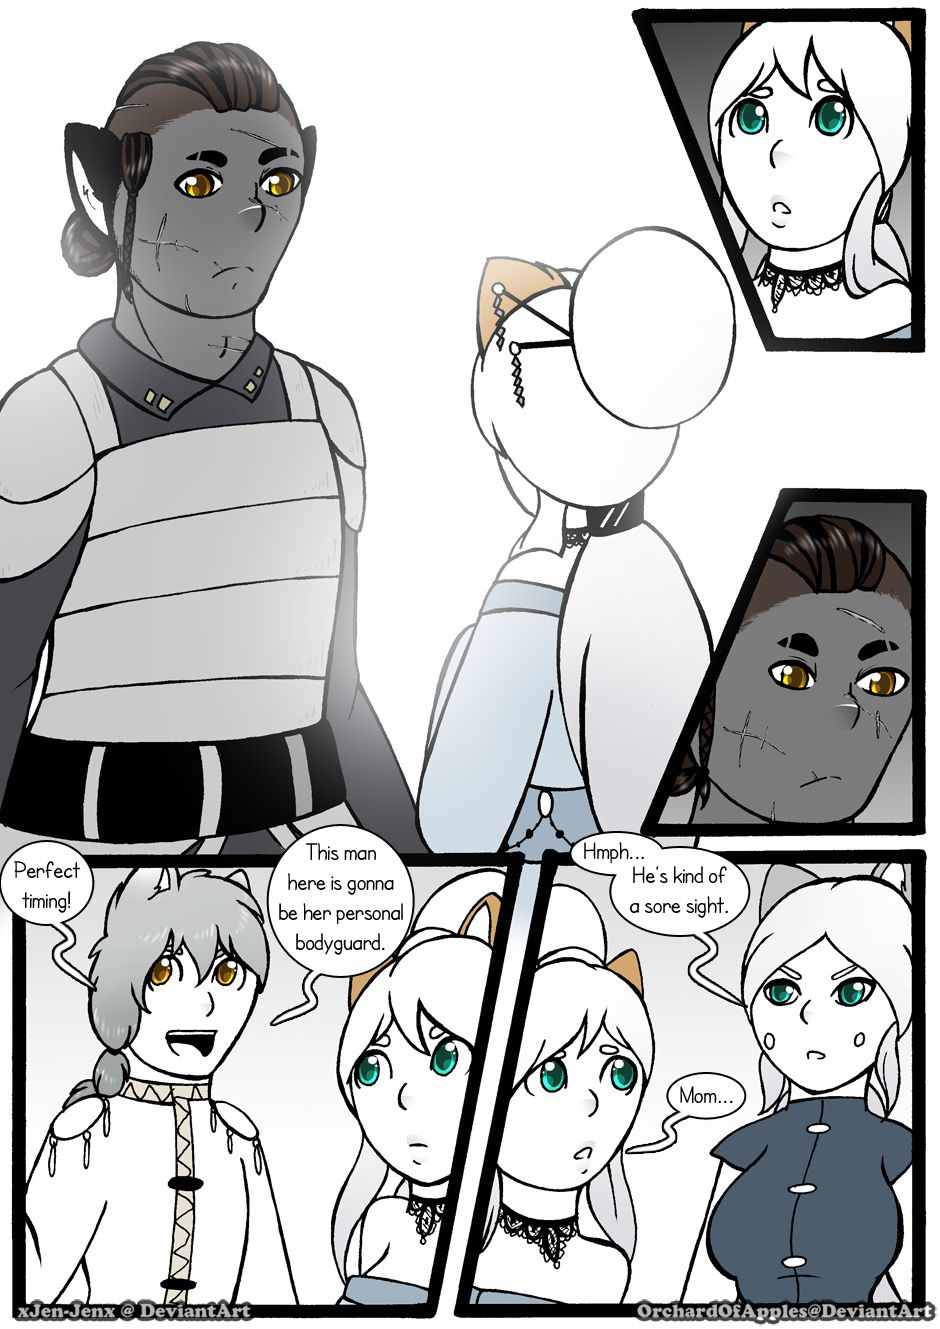 [Jeny-jen94] Between Kings and Queens [Ongoing] 200